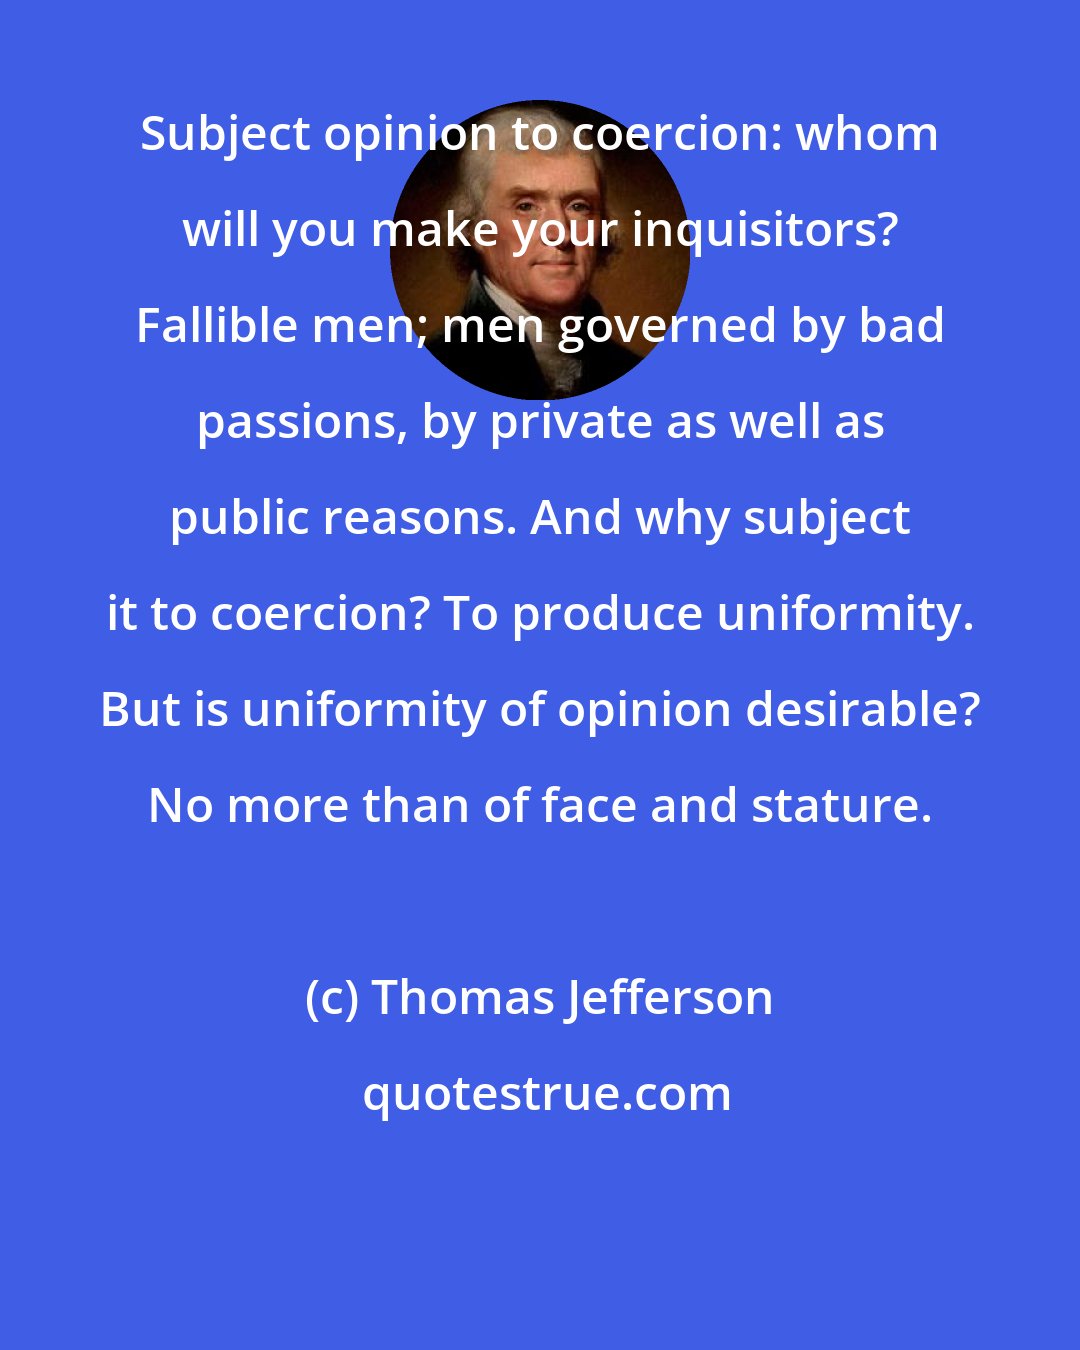 Thomas Jefferson: Subject opinion to coercion: whom will you make your inquisitors? Fallible men; men governed by bad passions, by private as well as public reasons. And why subject it to coercion? To produce uniformity. But is uniformity of opinion desirable? No more than of face and stature.